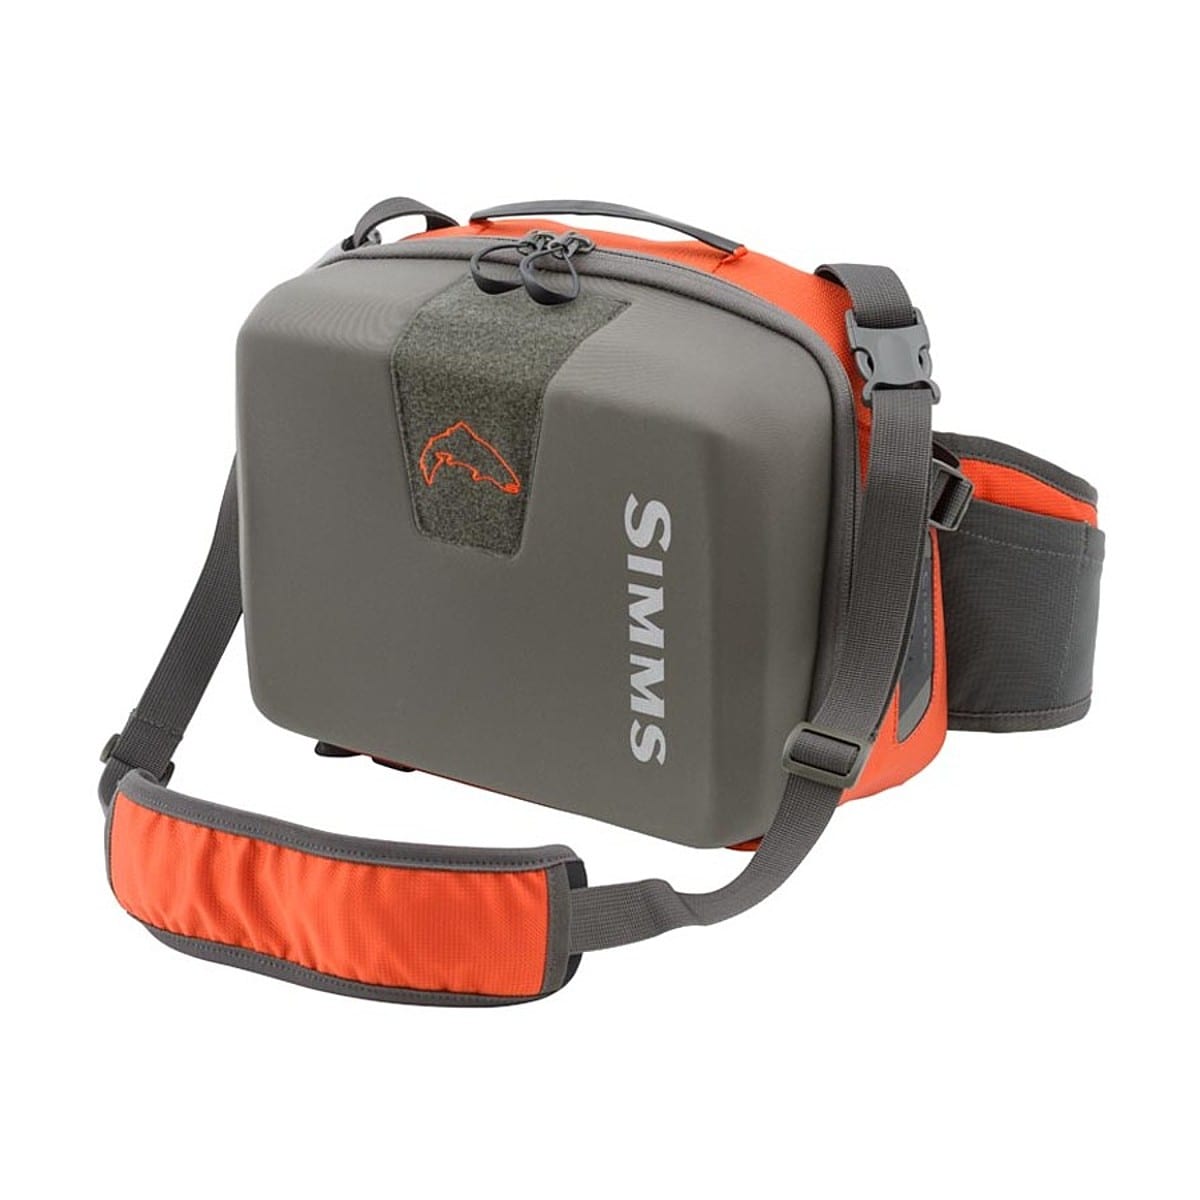 Fly Fishing Gear Review: The Patagonia Stealth Hip Pack 10L – The